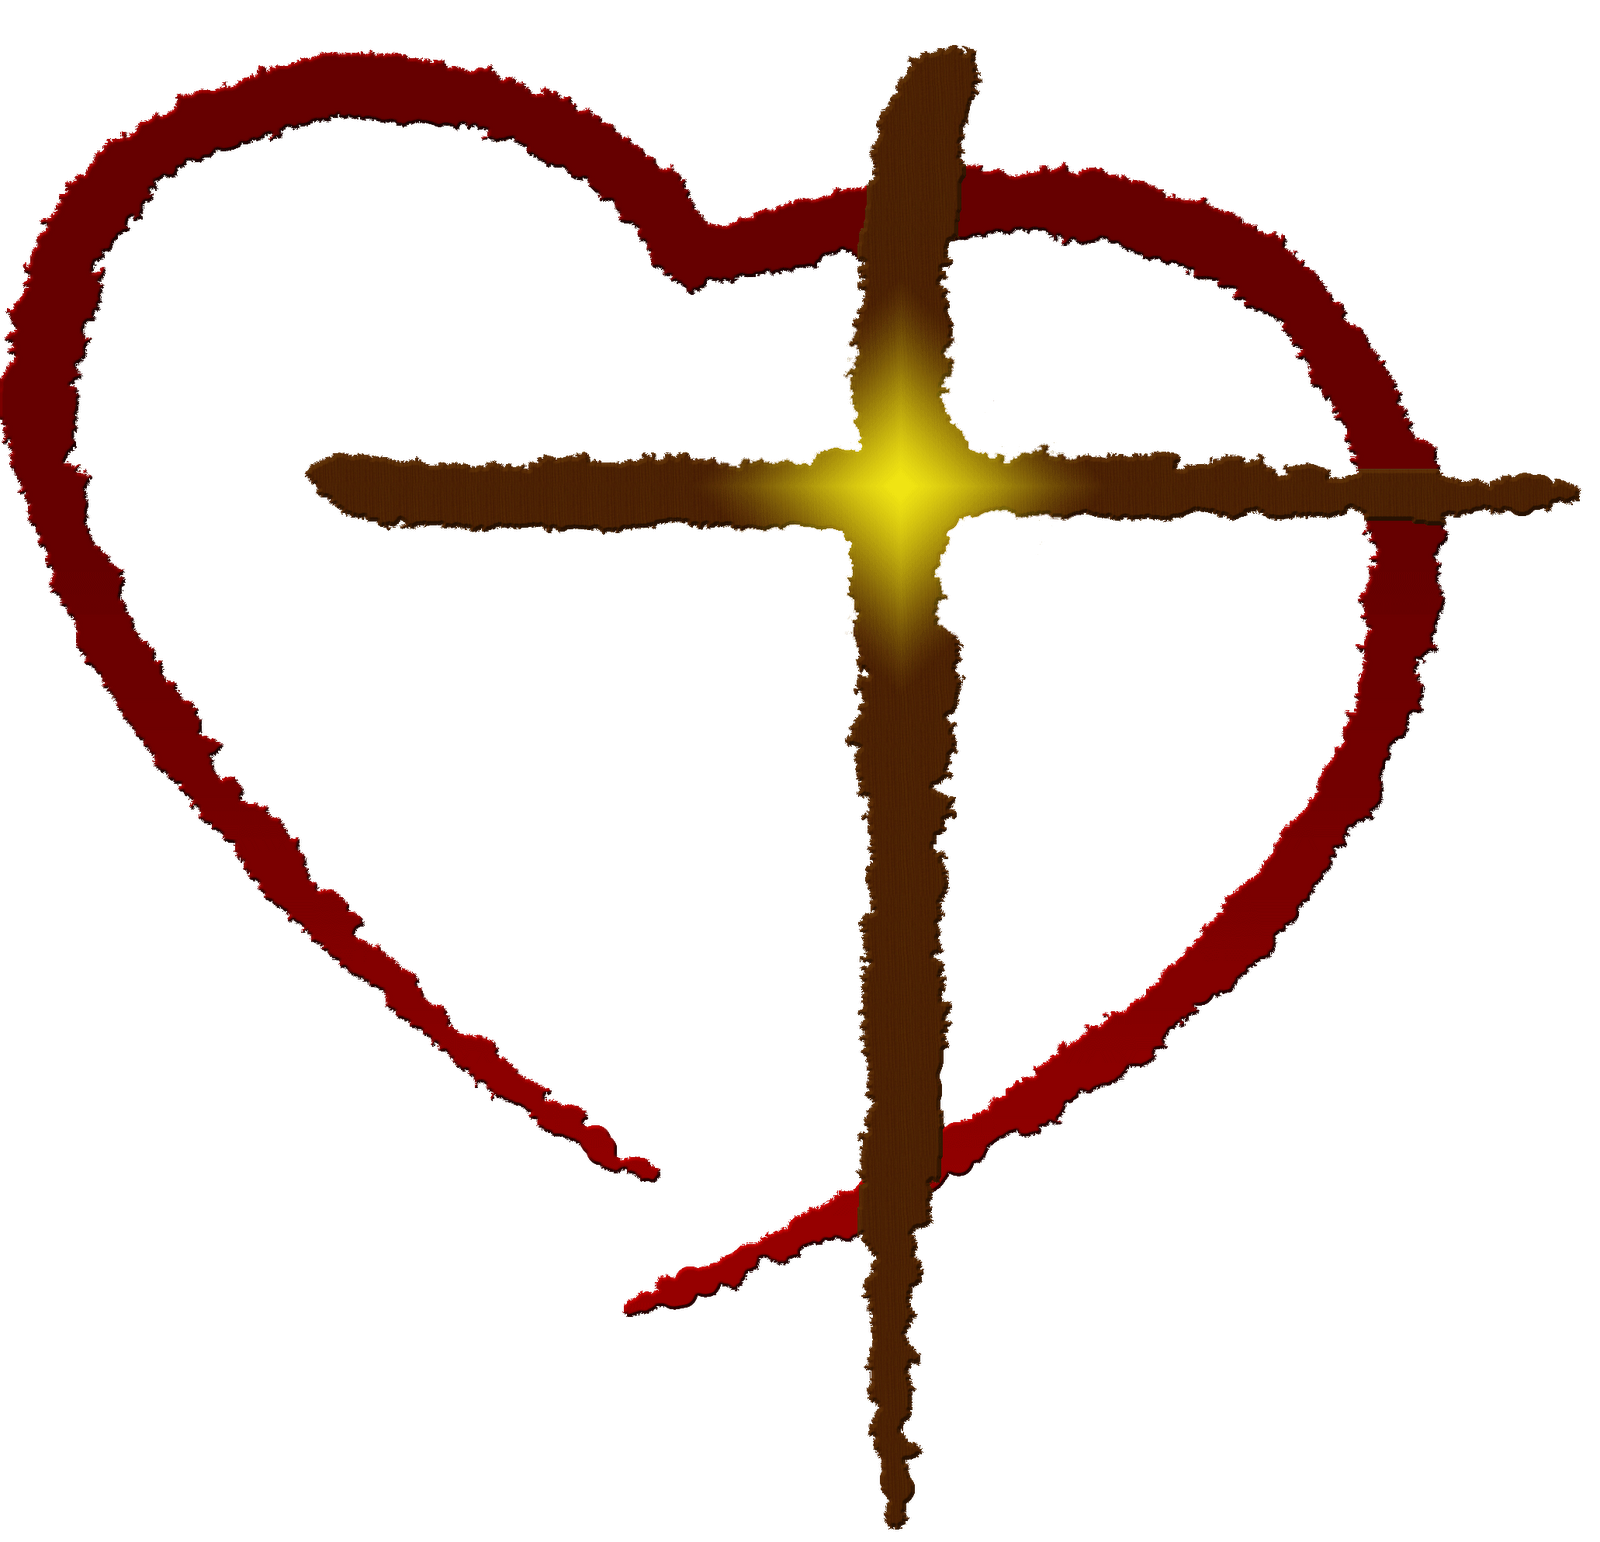 Free Religious Love Cliparts, Download Free Clip Art, Free.